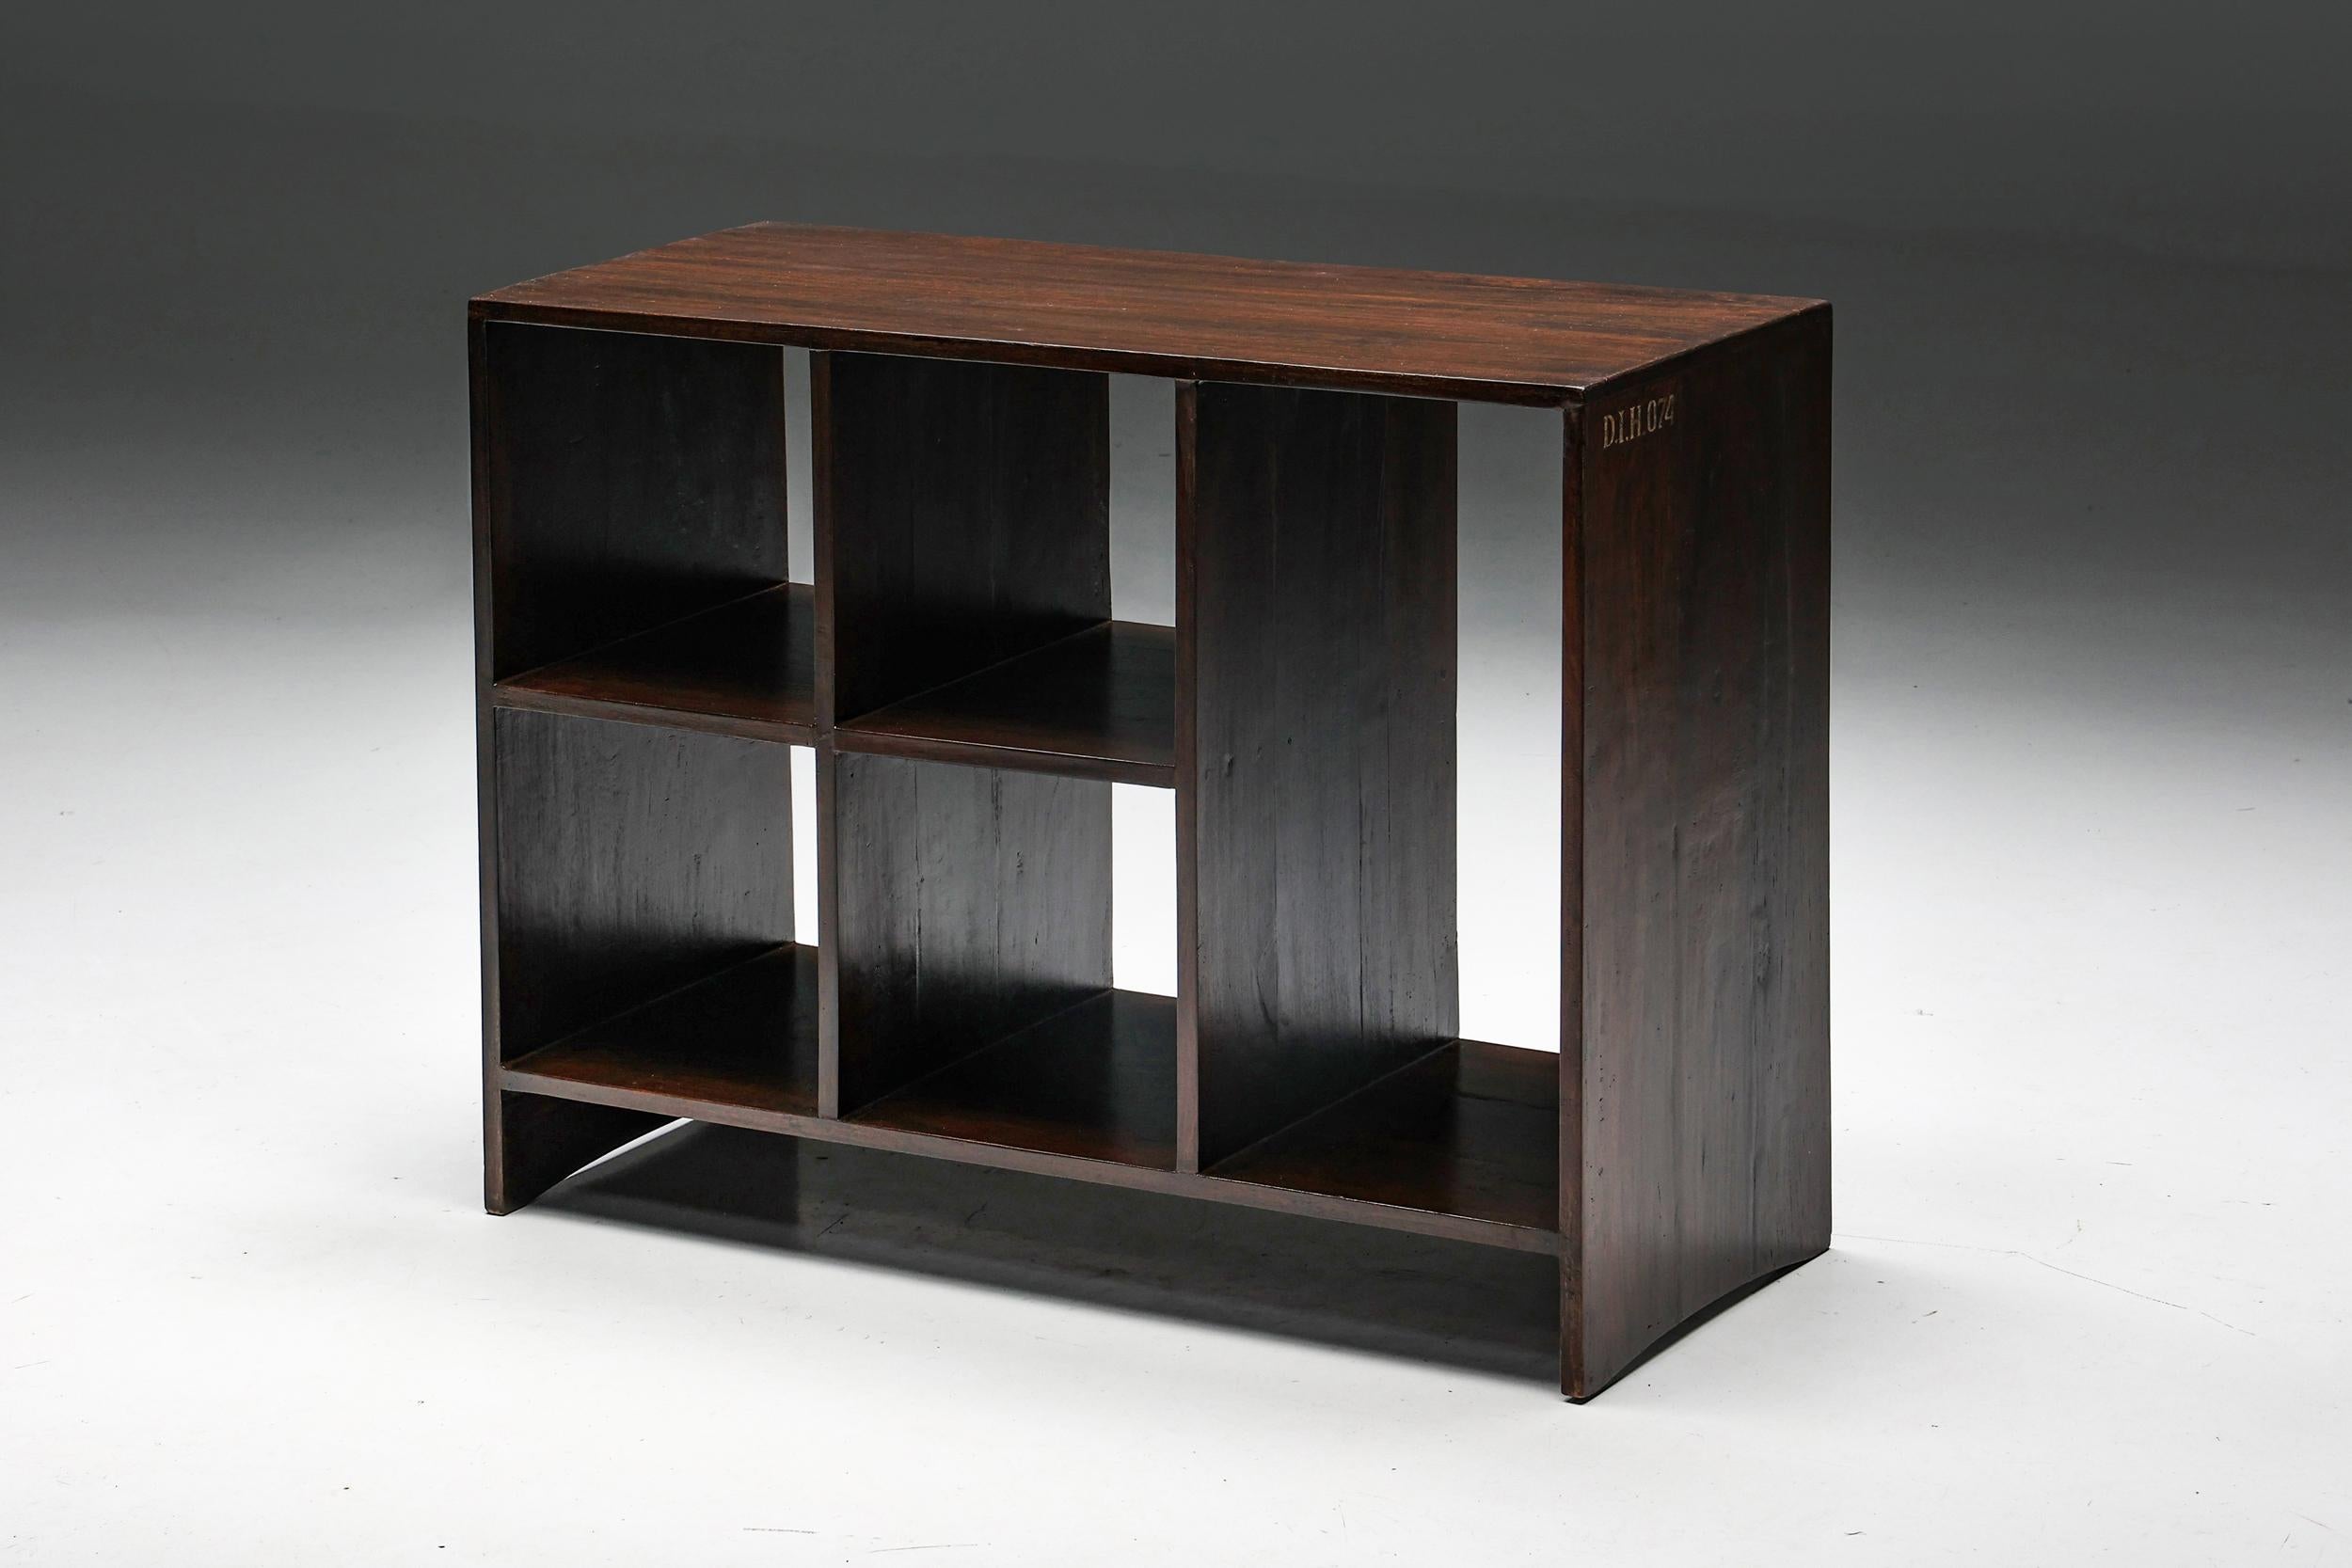 File Rack; Pierre Jeanneret; Le Corbusier; Low Cupboard; D.I.H. 074; PJ-050205; Chandigarh; 1957; 1958; 1950s; India; Cabinet; Shelving Unit; Mid-Century Modern; Bookshelf; Sideboard; Room Divider;

This double-sided low cupboard, known as 